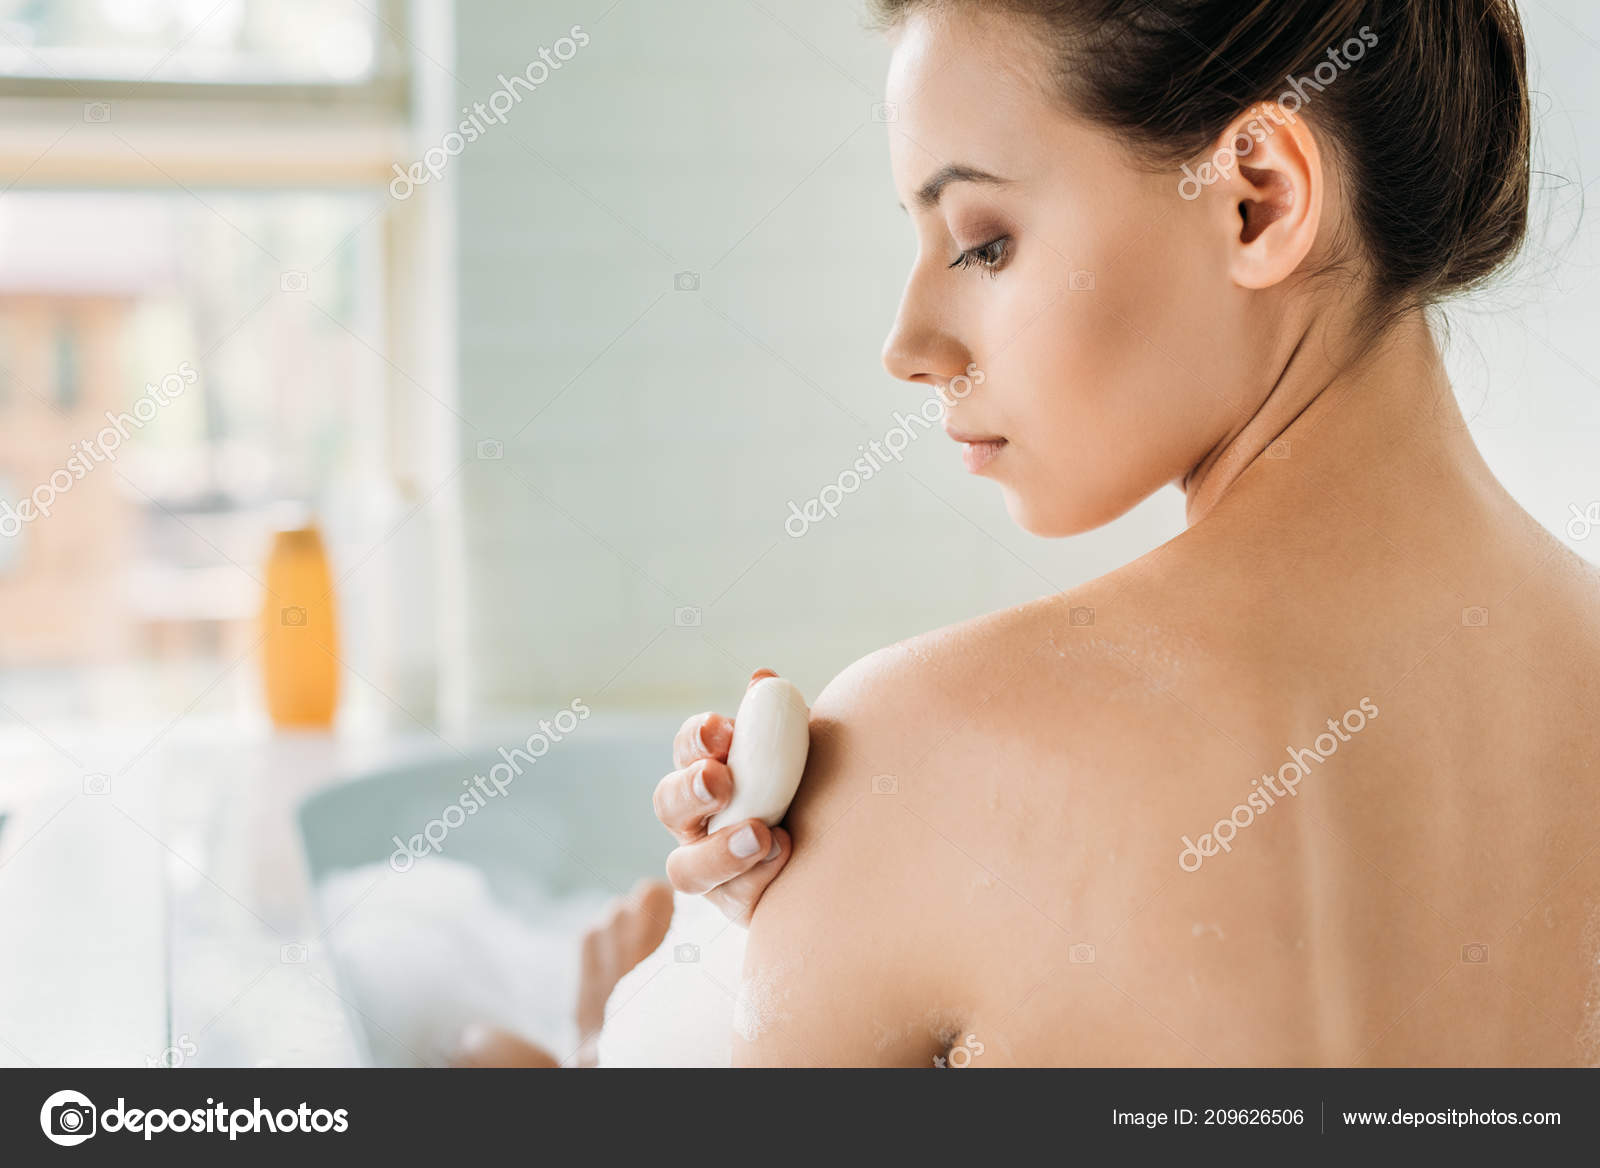 naked girl takeing a bath